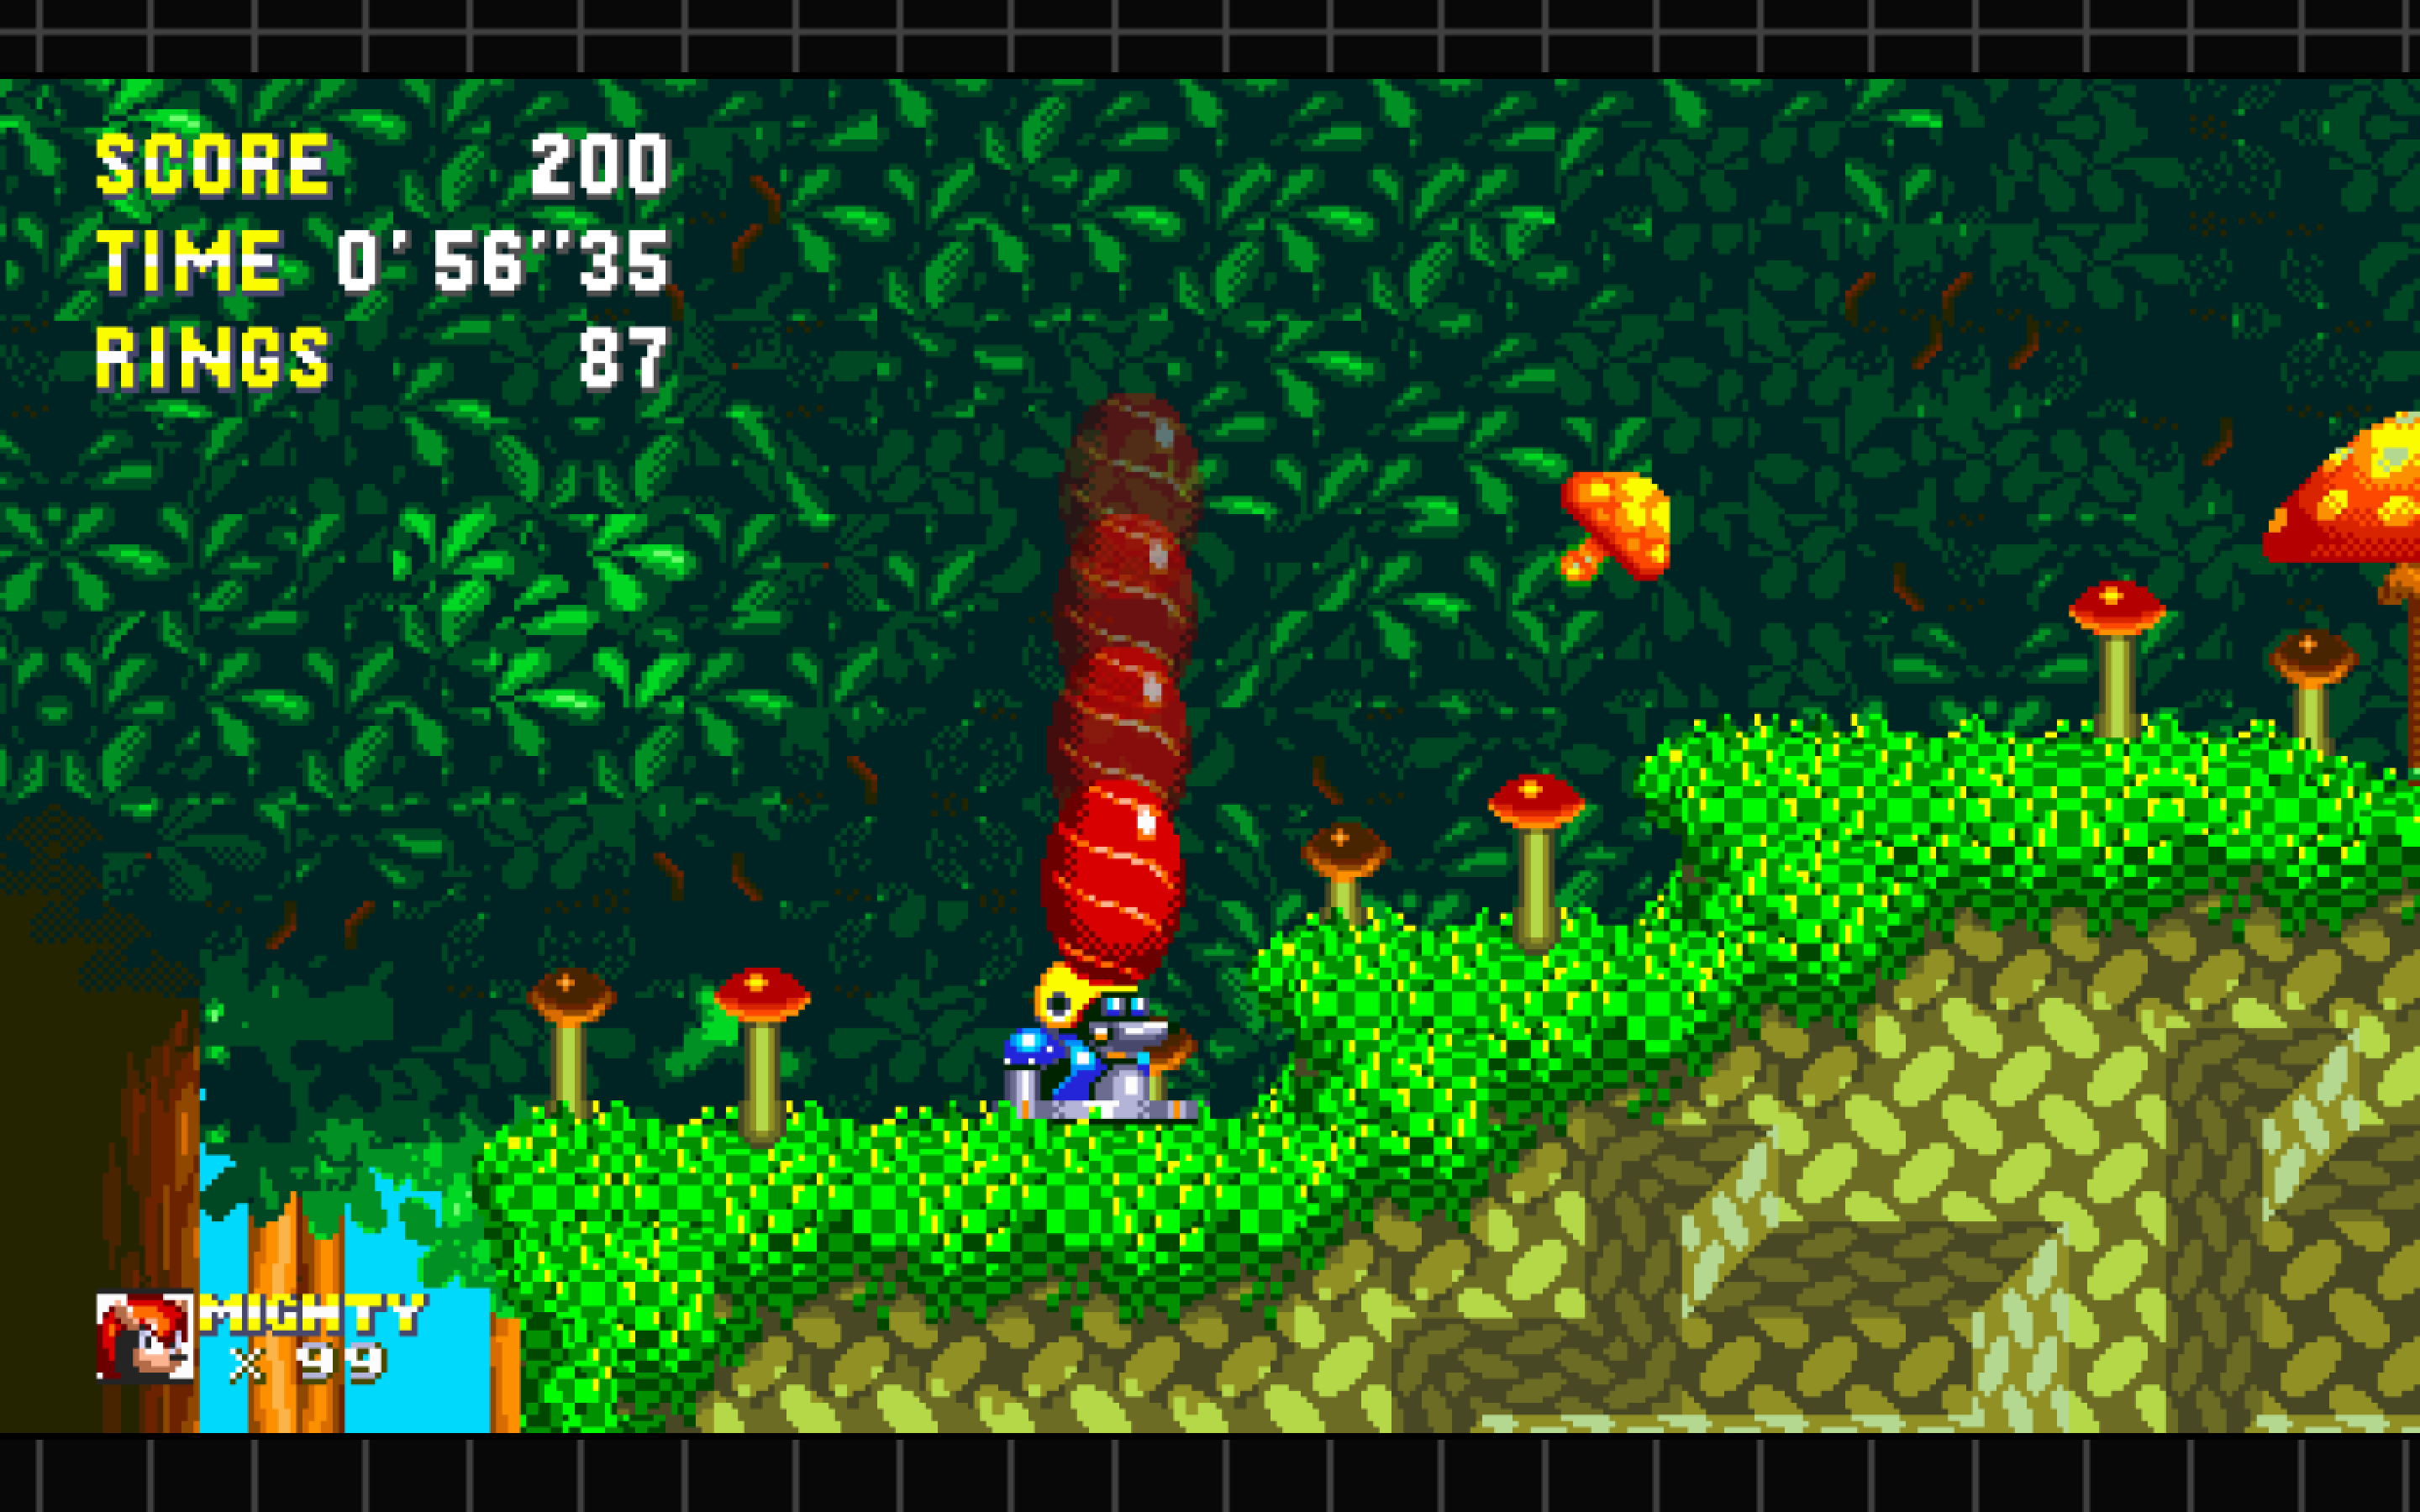 D-Side Mighty In Sonic 3 A.I.R (Hotfix) [Sonic 3 A.I.R.] [Works In Progress]